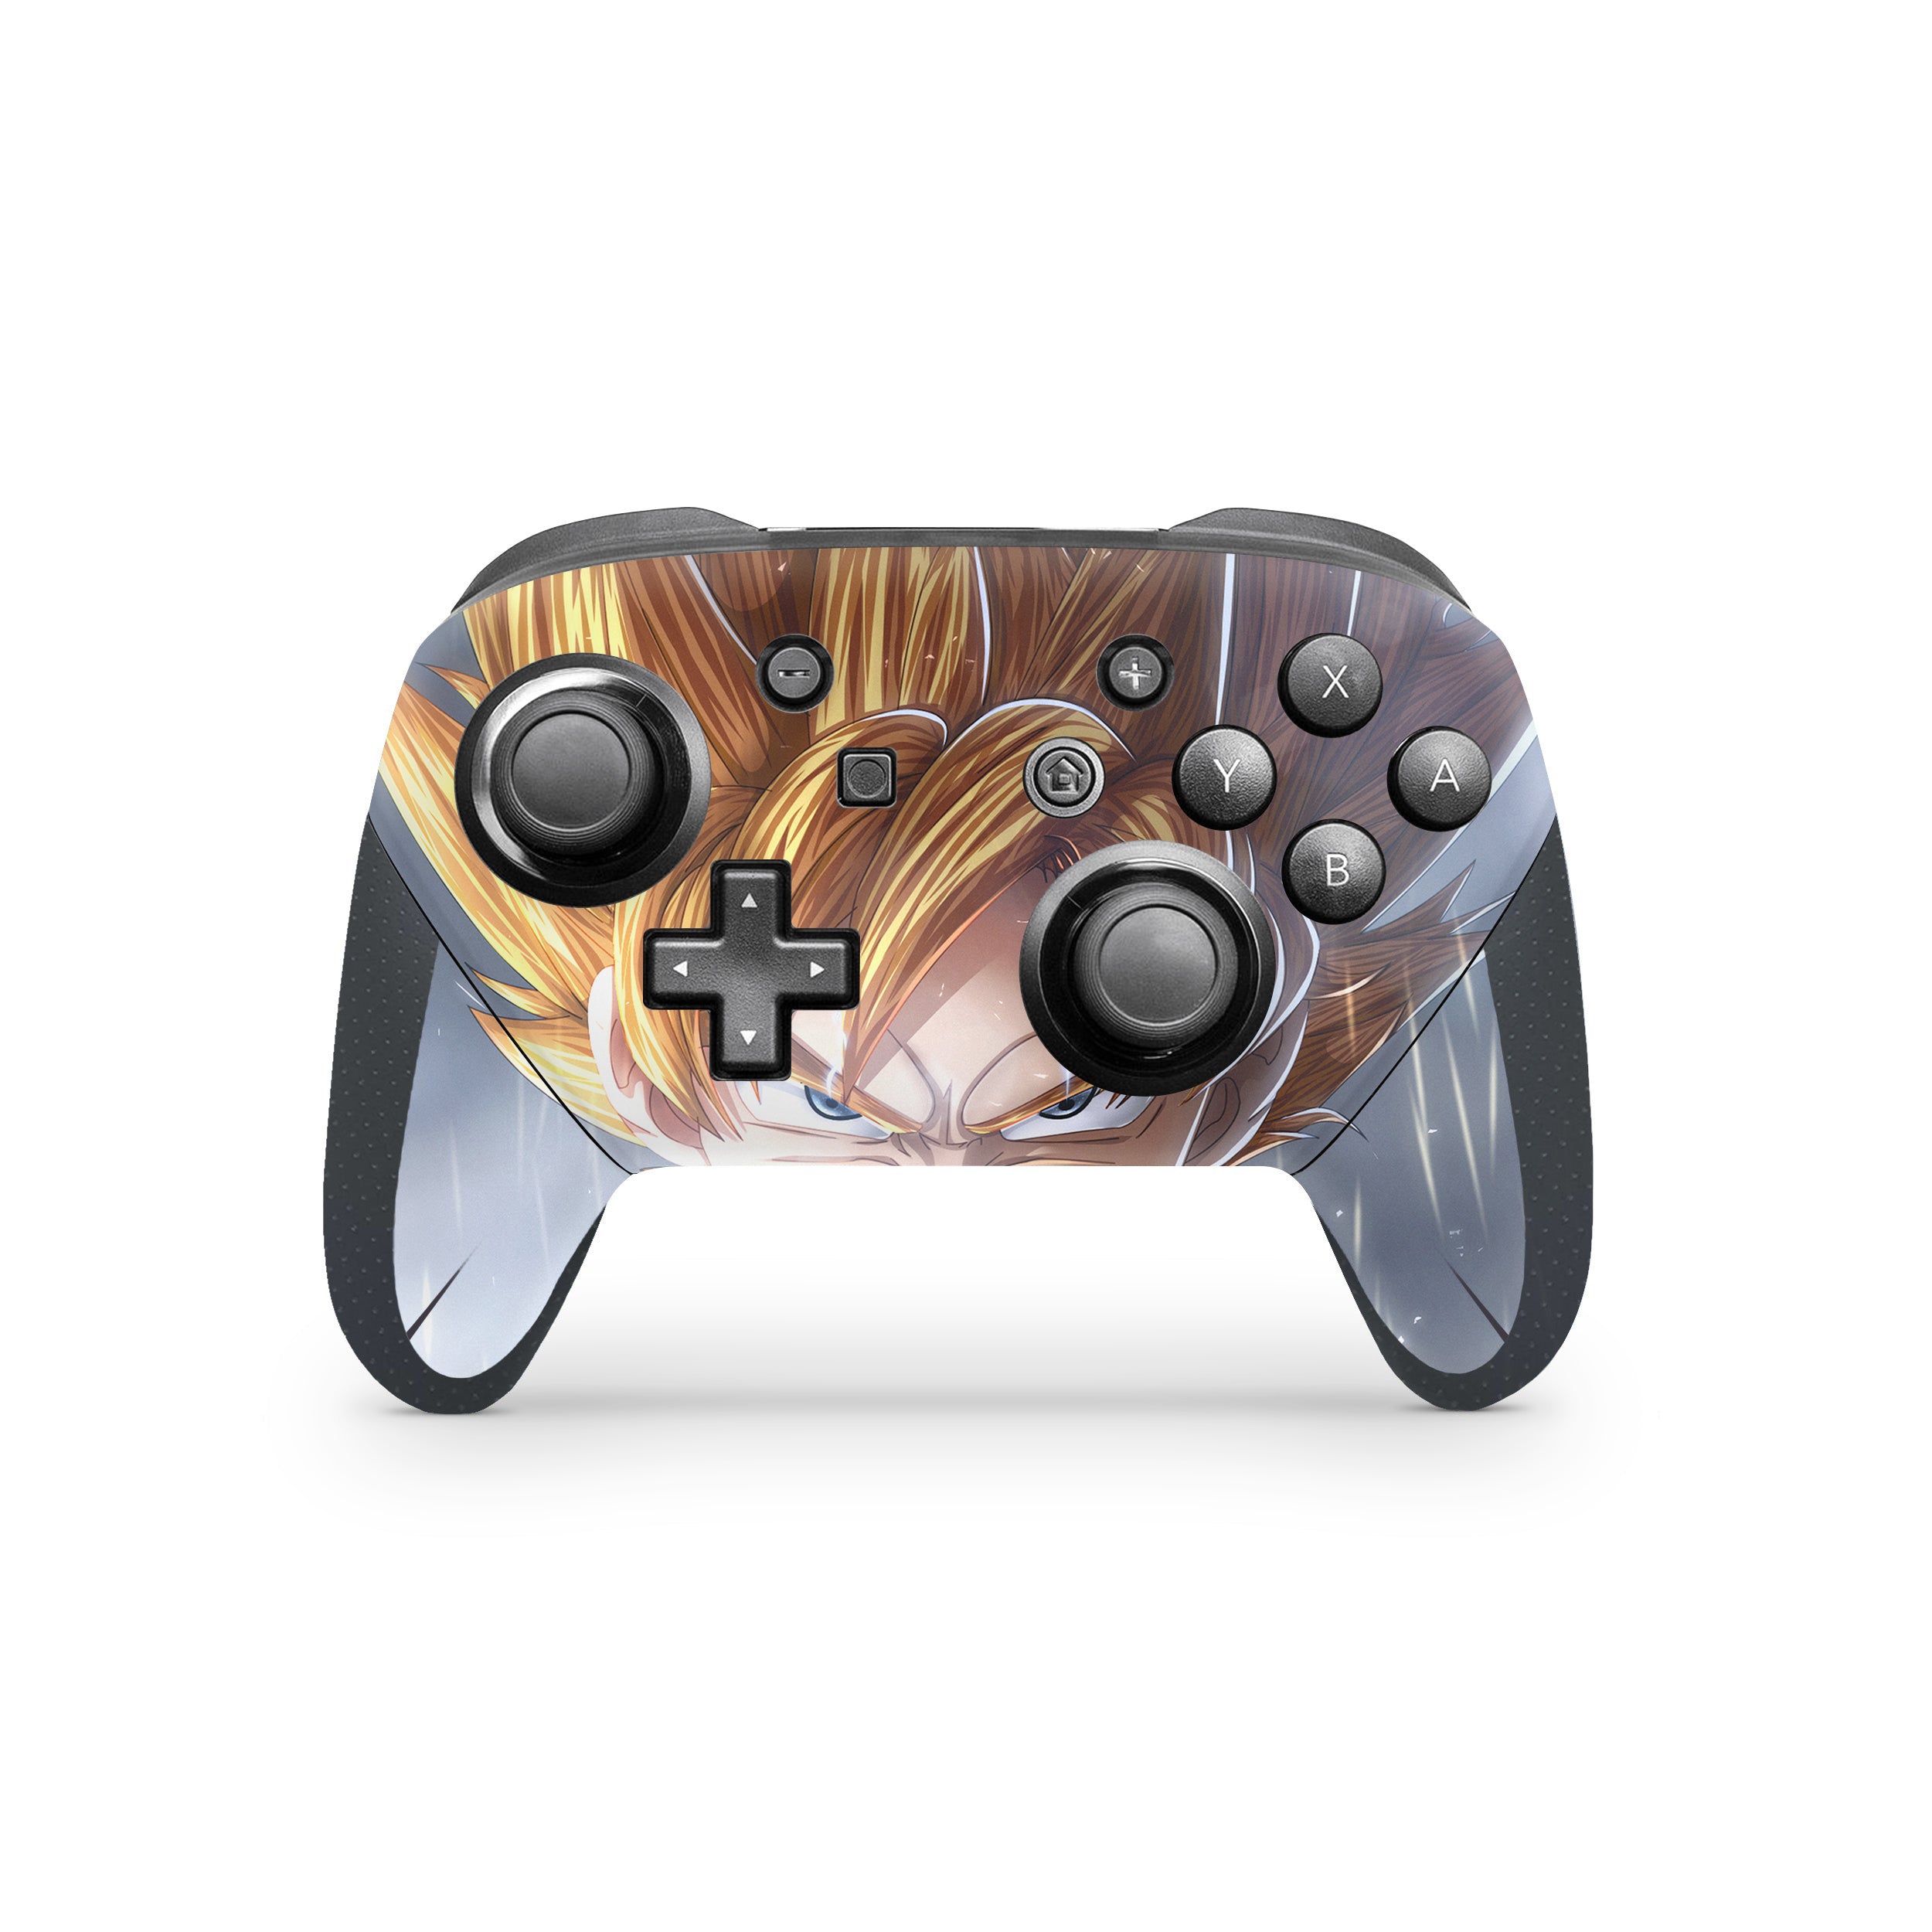 A video game skin featuring a Dragon Ball Z Goku Super Saiyan design for the Switch Pro Controller.